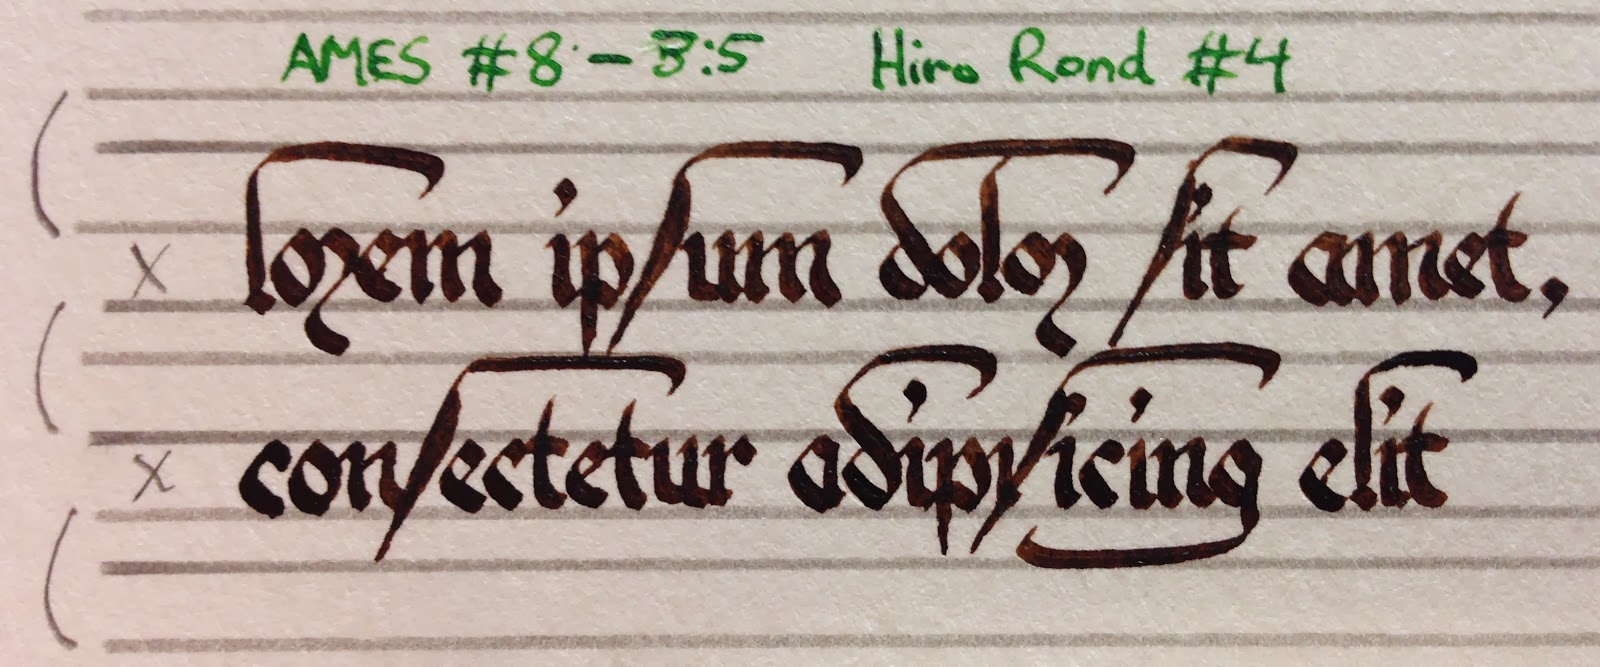 question about using a lettering guide - my H3 pencil keeps breaking. what  should I use to draw the lines? : r/Calligraphy